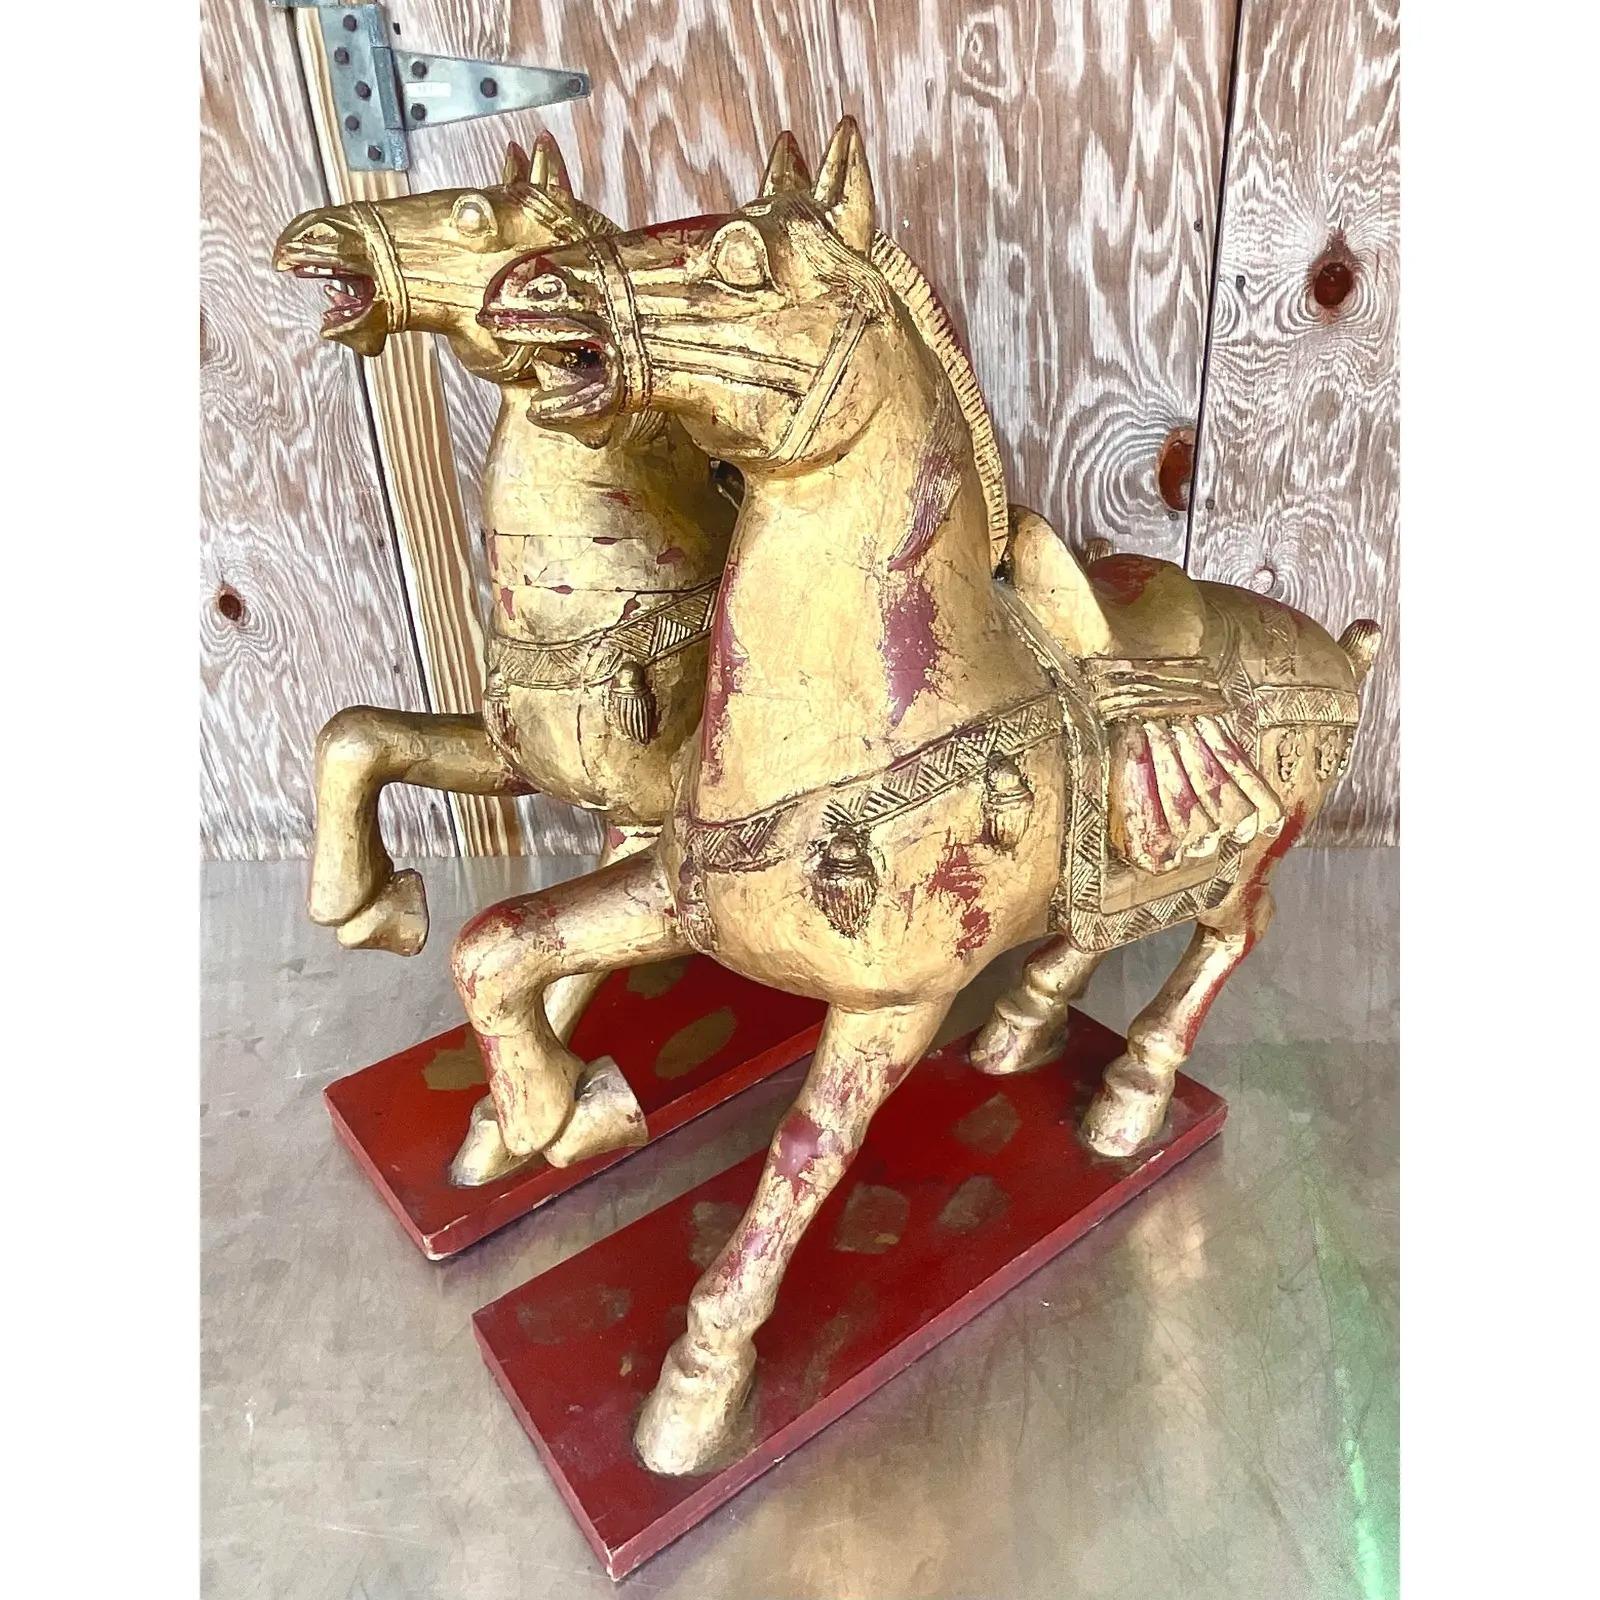 Chinese Vintage Asian Gilt Carved Wooden Emperor Horses - a Pair For Sale